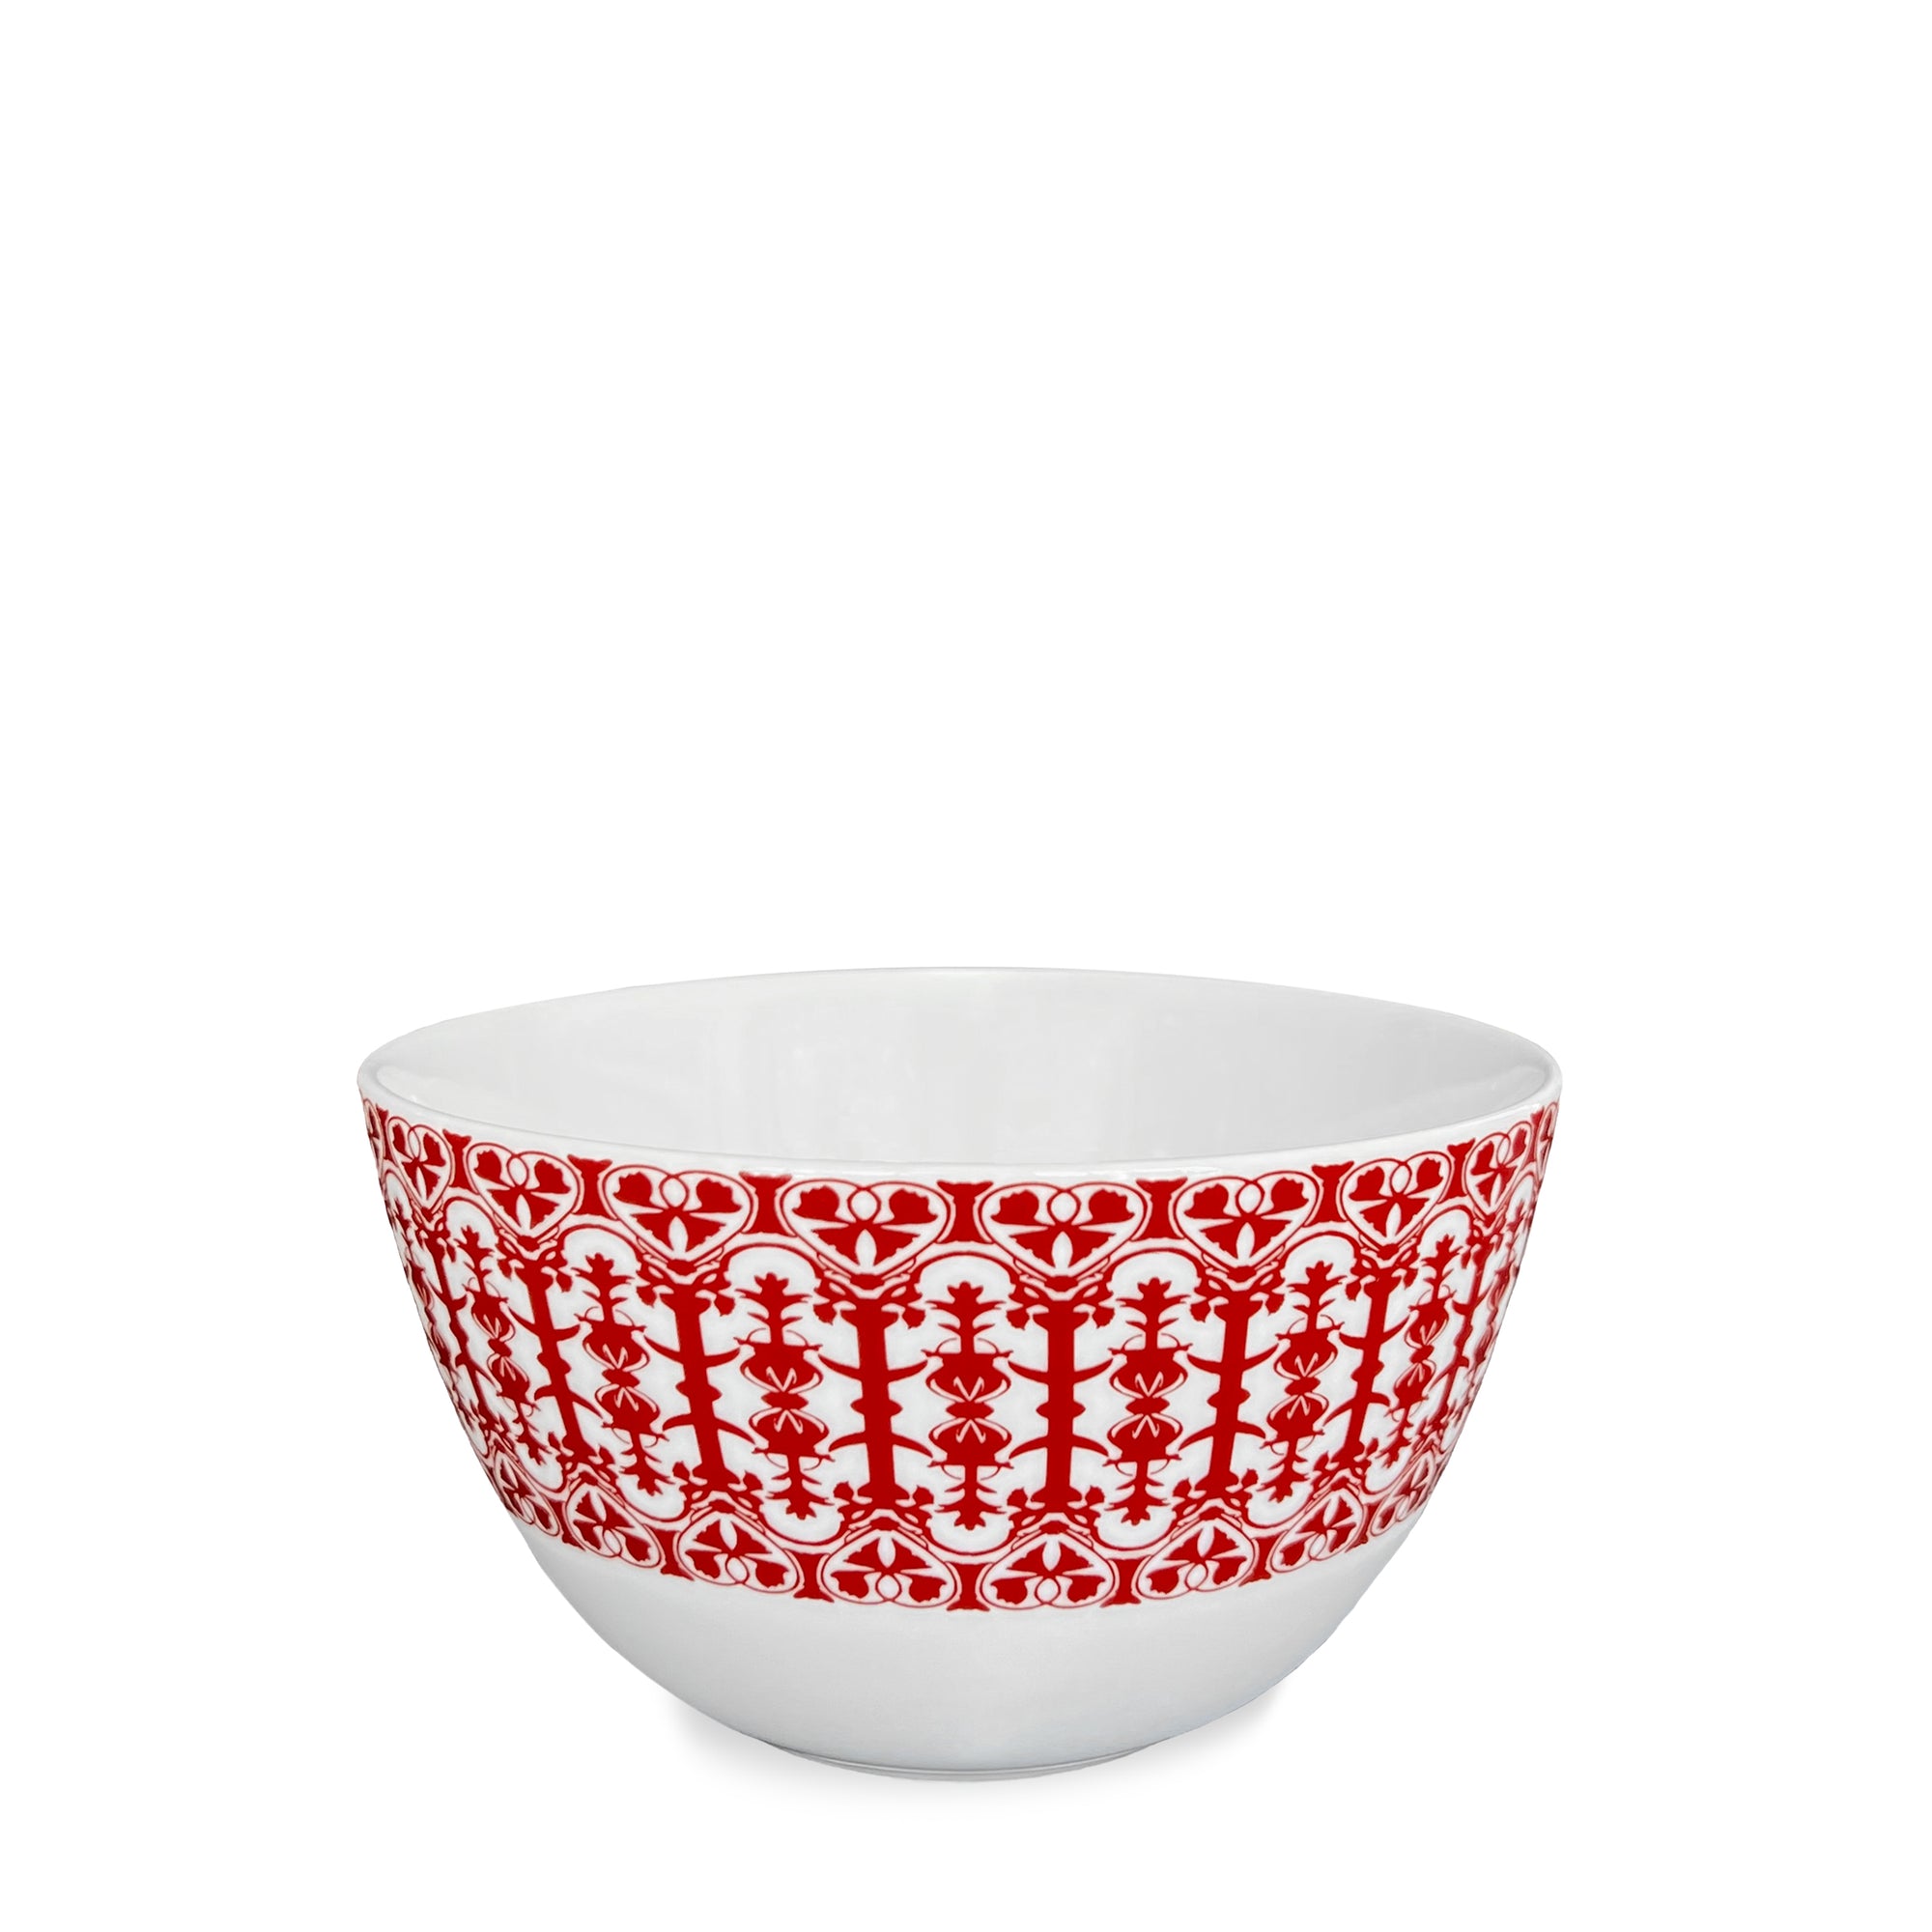 A high-fired porcelain bowl featuring an intricate red pattern around its exterior, embodying the charm of Caskata's Casablanca Crimson Cereal Bowl.